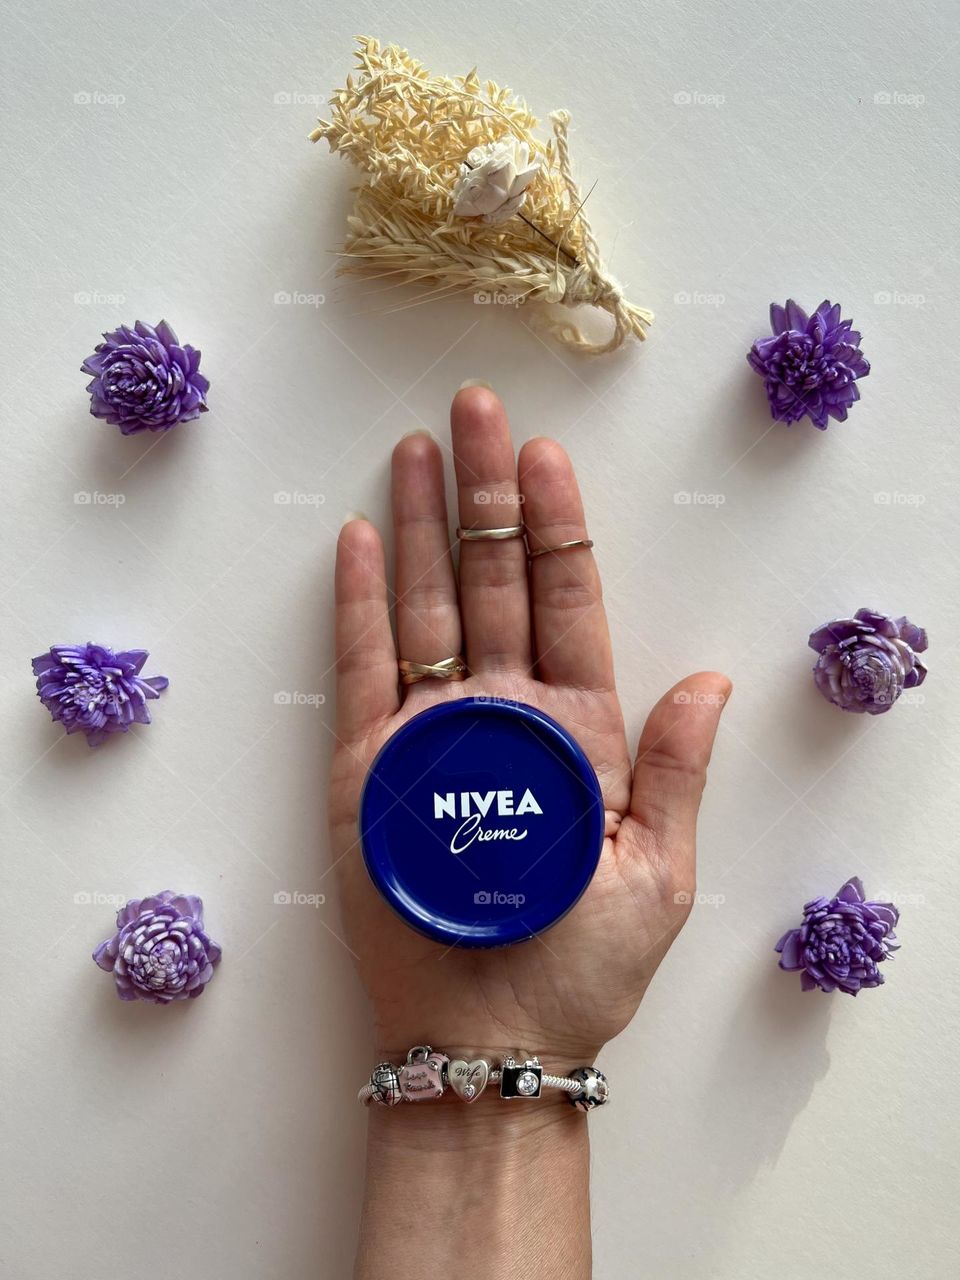 Cosmetic, hand holding the Nivea cream, famous beauty brand.